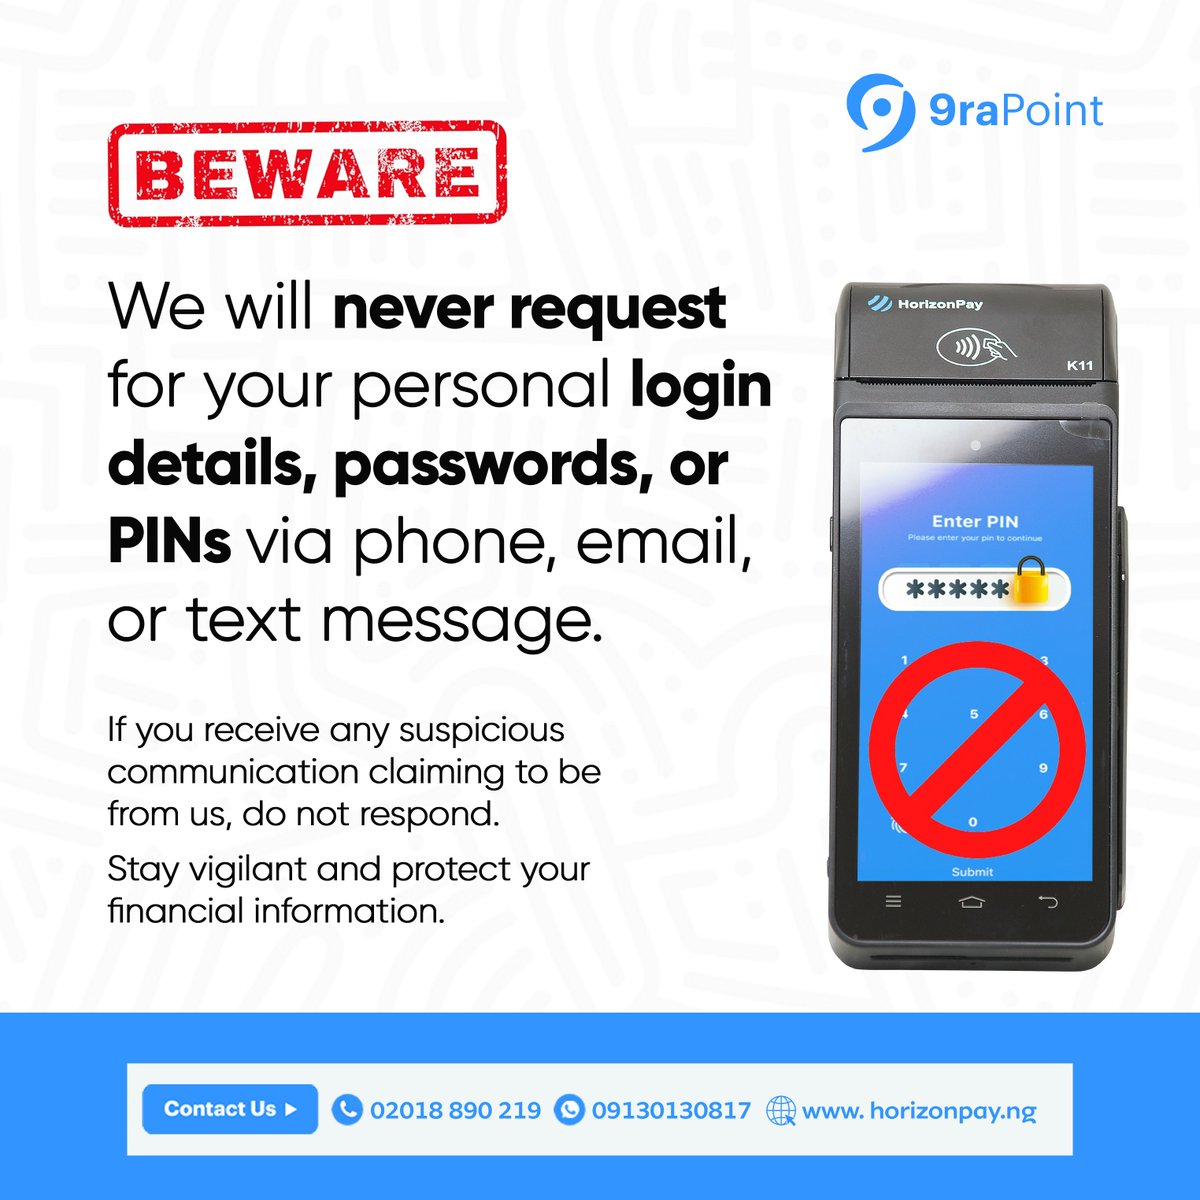 Kindly note that We will never request for your personal login details, passwords, or PINs via phone, email, or text message❗

If you receive any suspicious communication or claiming to be from us, do not respond.

Contact us via 
call: 02018890219
WhatsApp: 09130130817